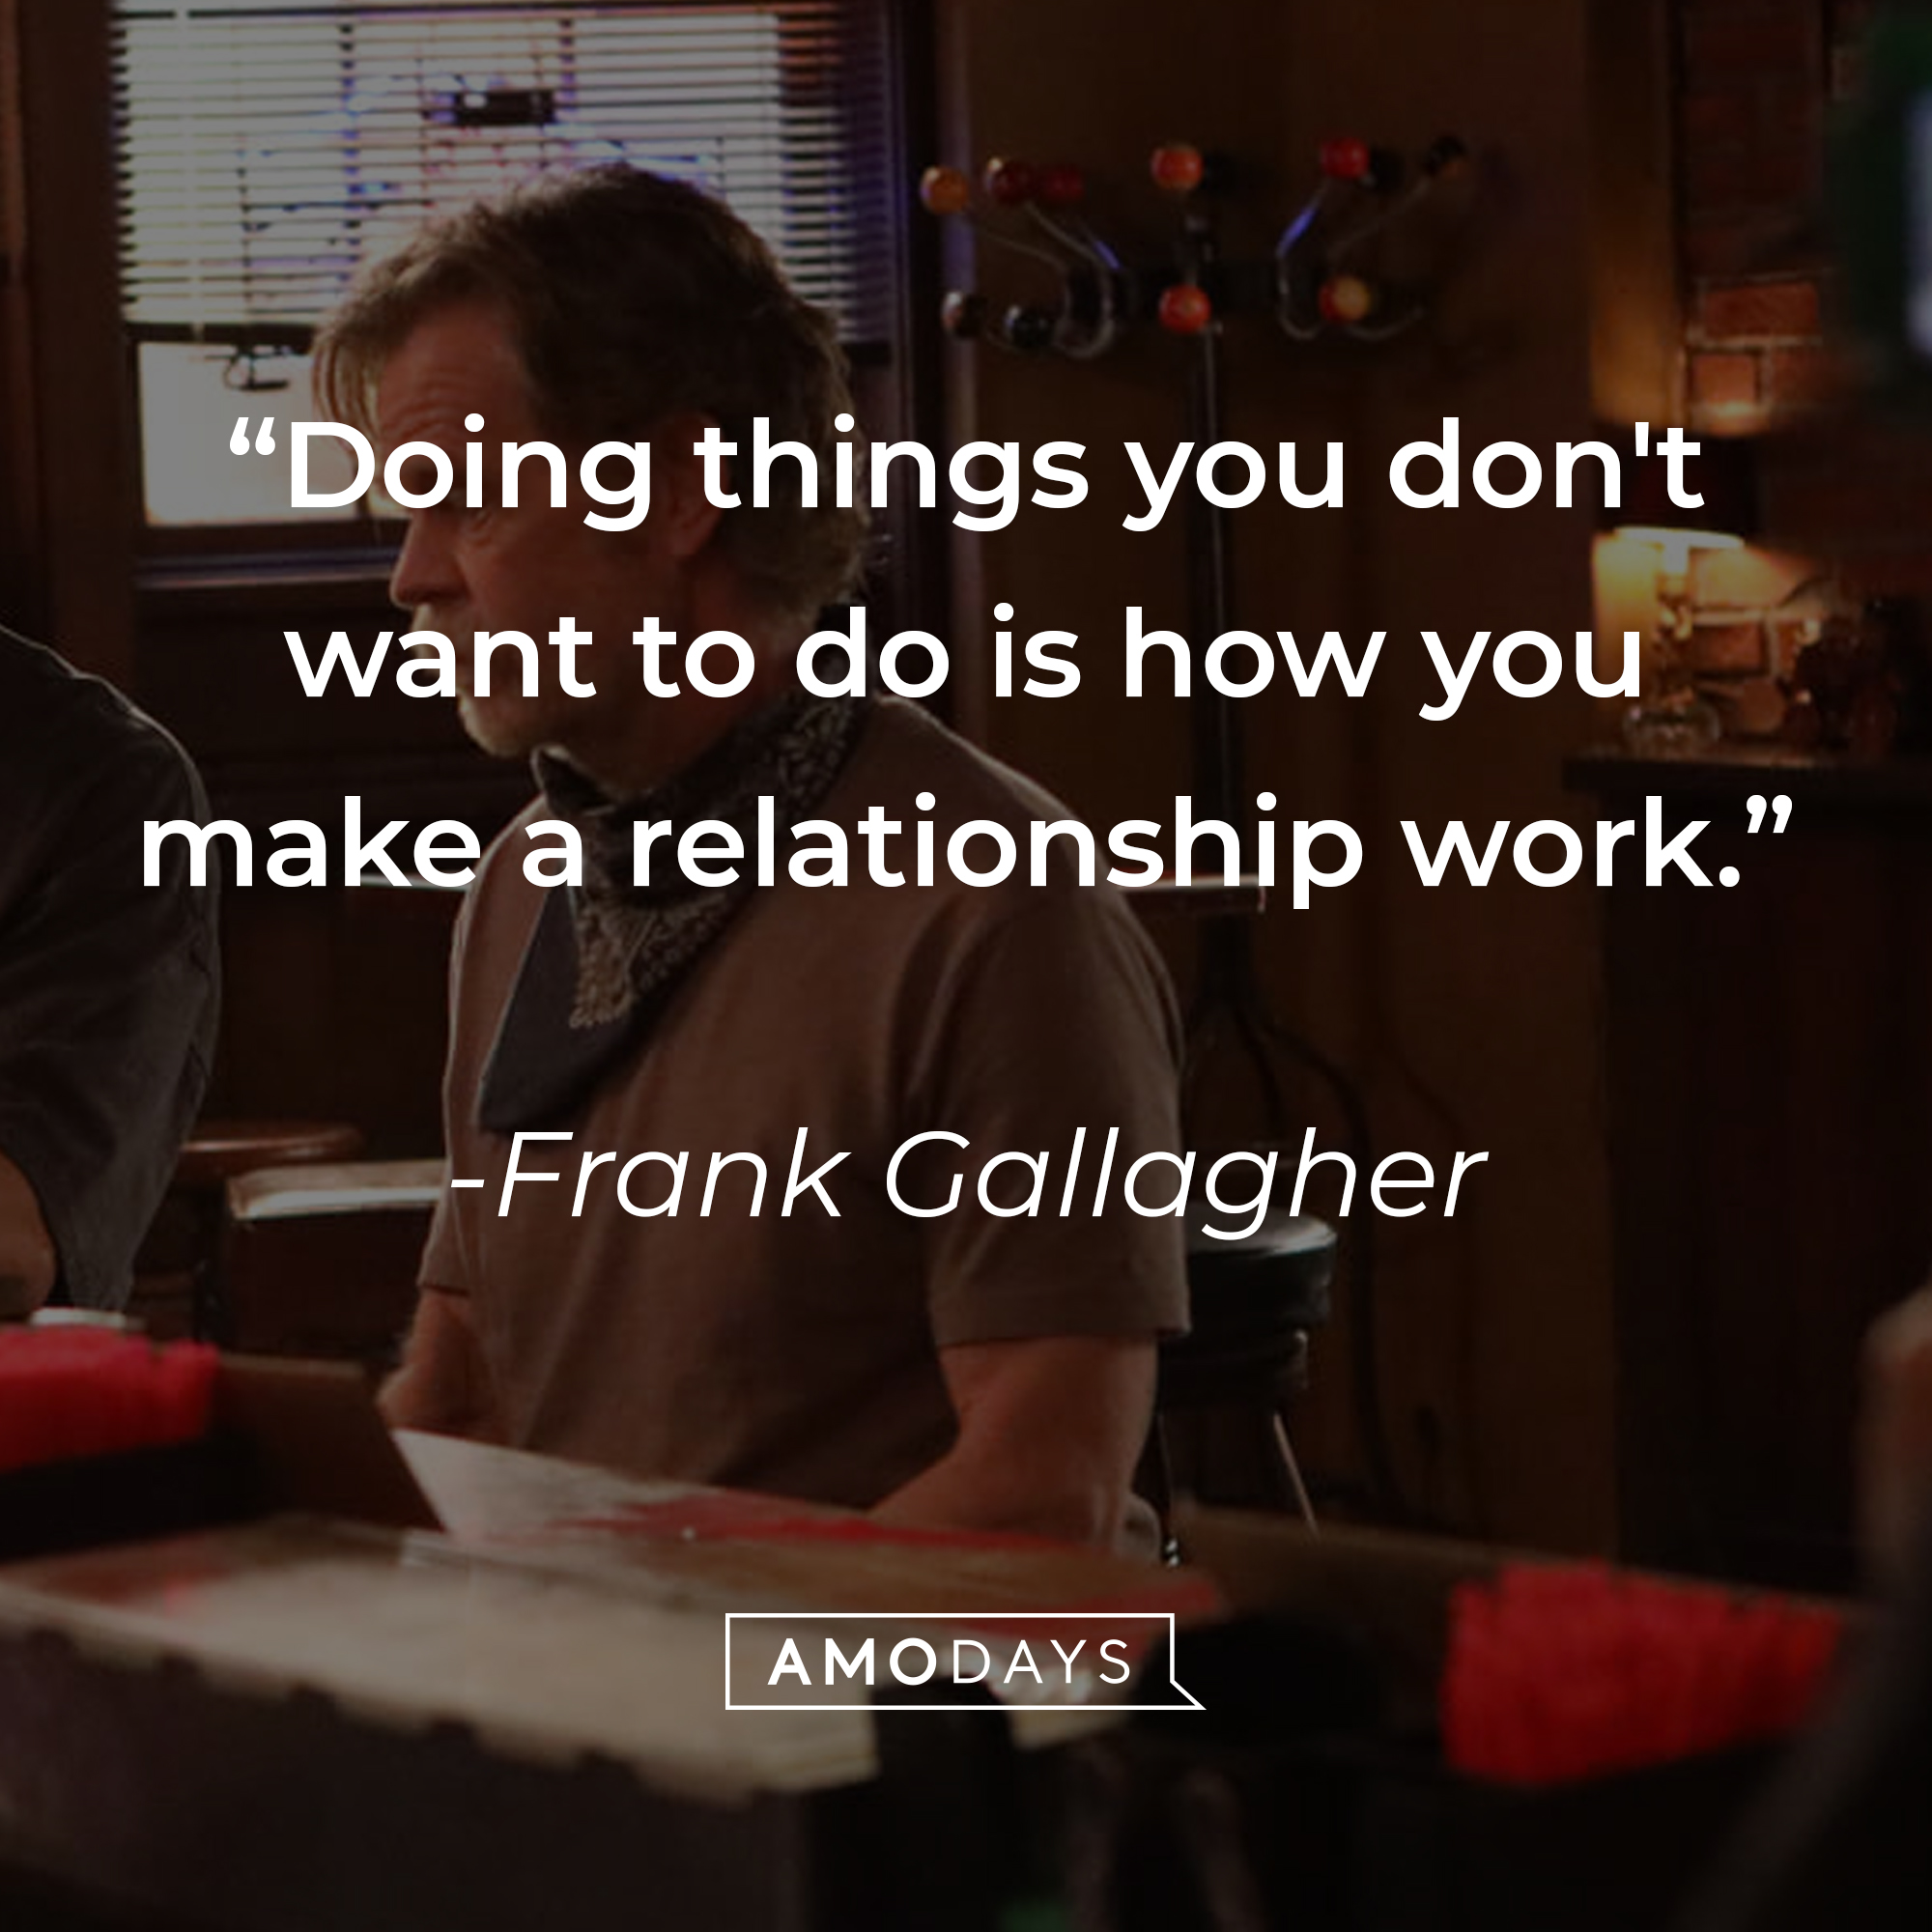 Frank Gallagher's quote: "Doing things you don't want to do is how you make a relationship work." | Source: facebook.com/ShamelessOnShowtime